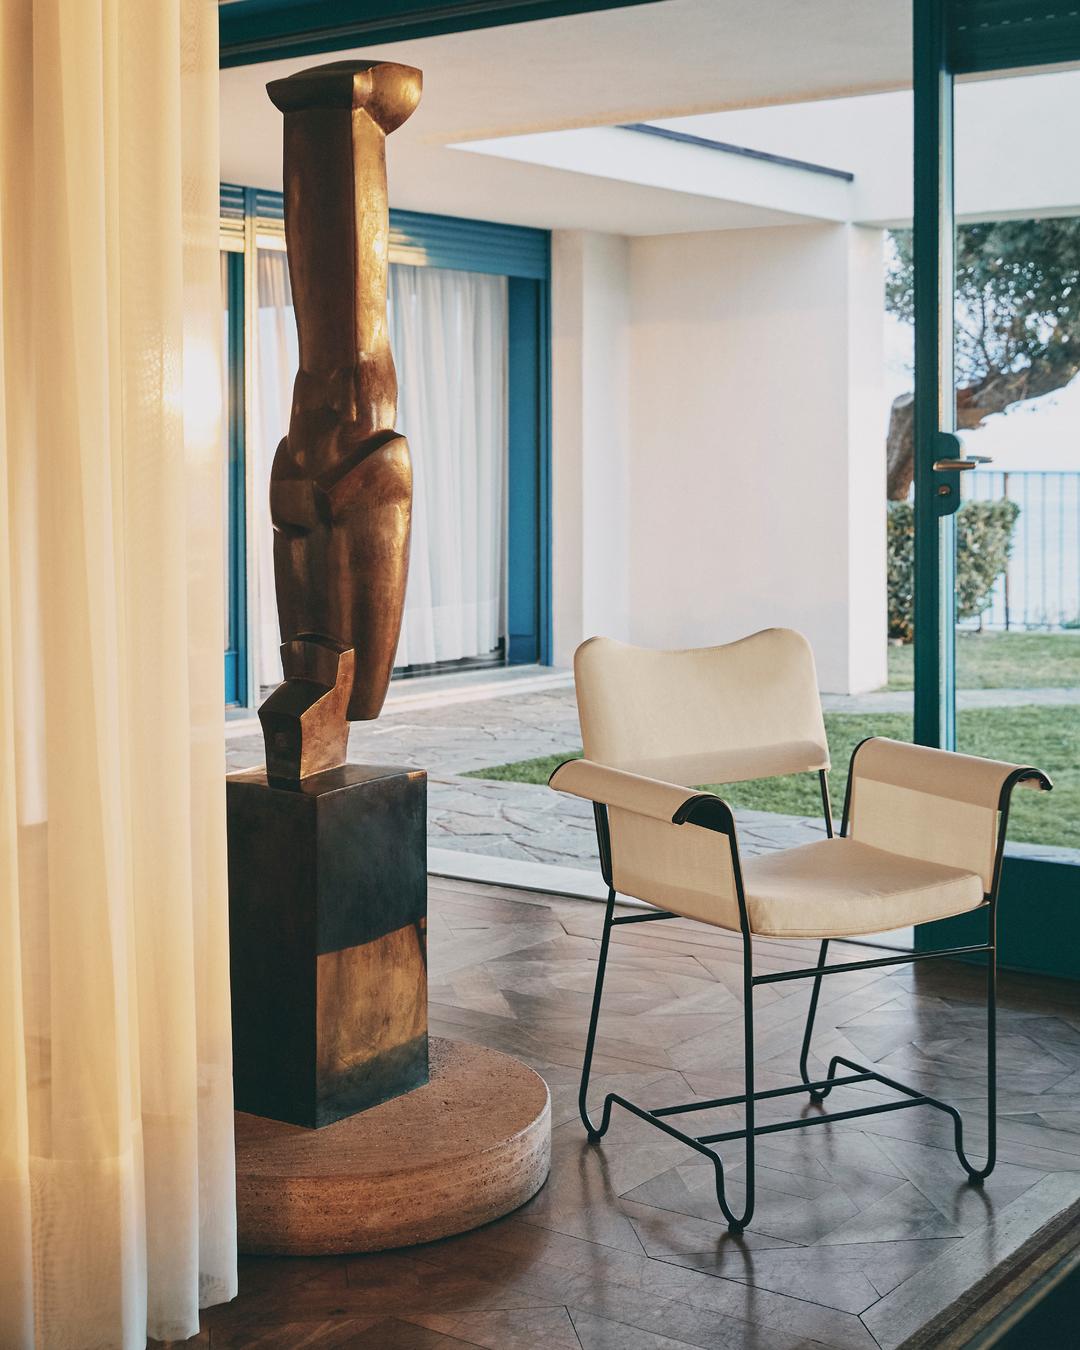 Created in the 1950s by the Hungarian-born French master of postwar design, Mathieu Matégot, the Tropique Collection of outdoor furniture captures the timeless glamour and exotic luxury of outdoor living on the Côte d’Azur in the mid-20th